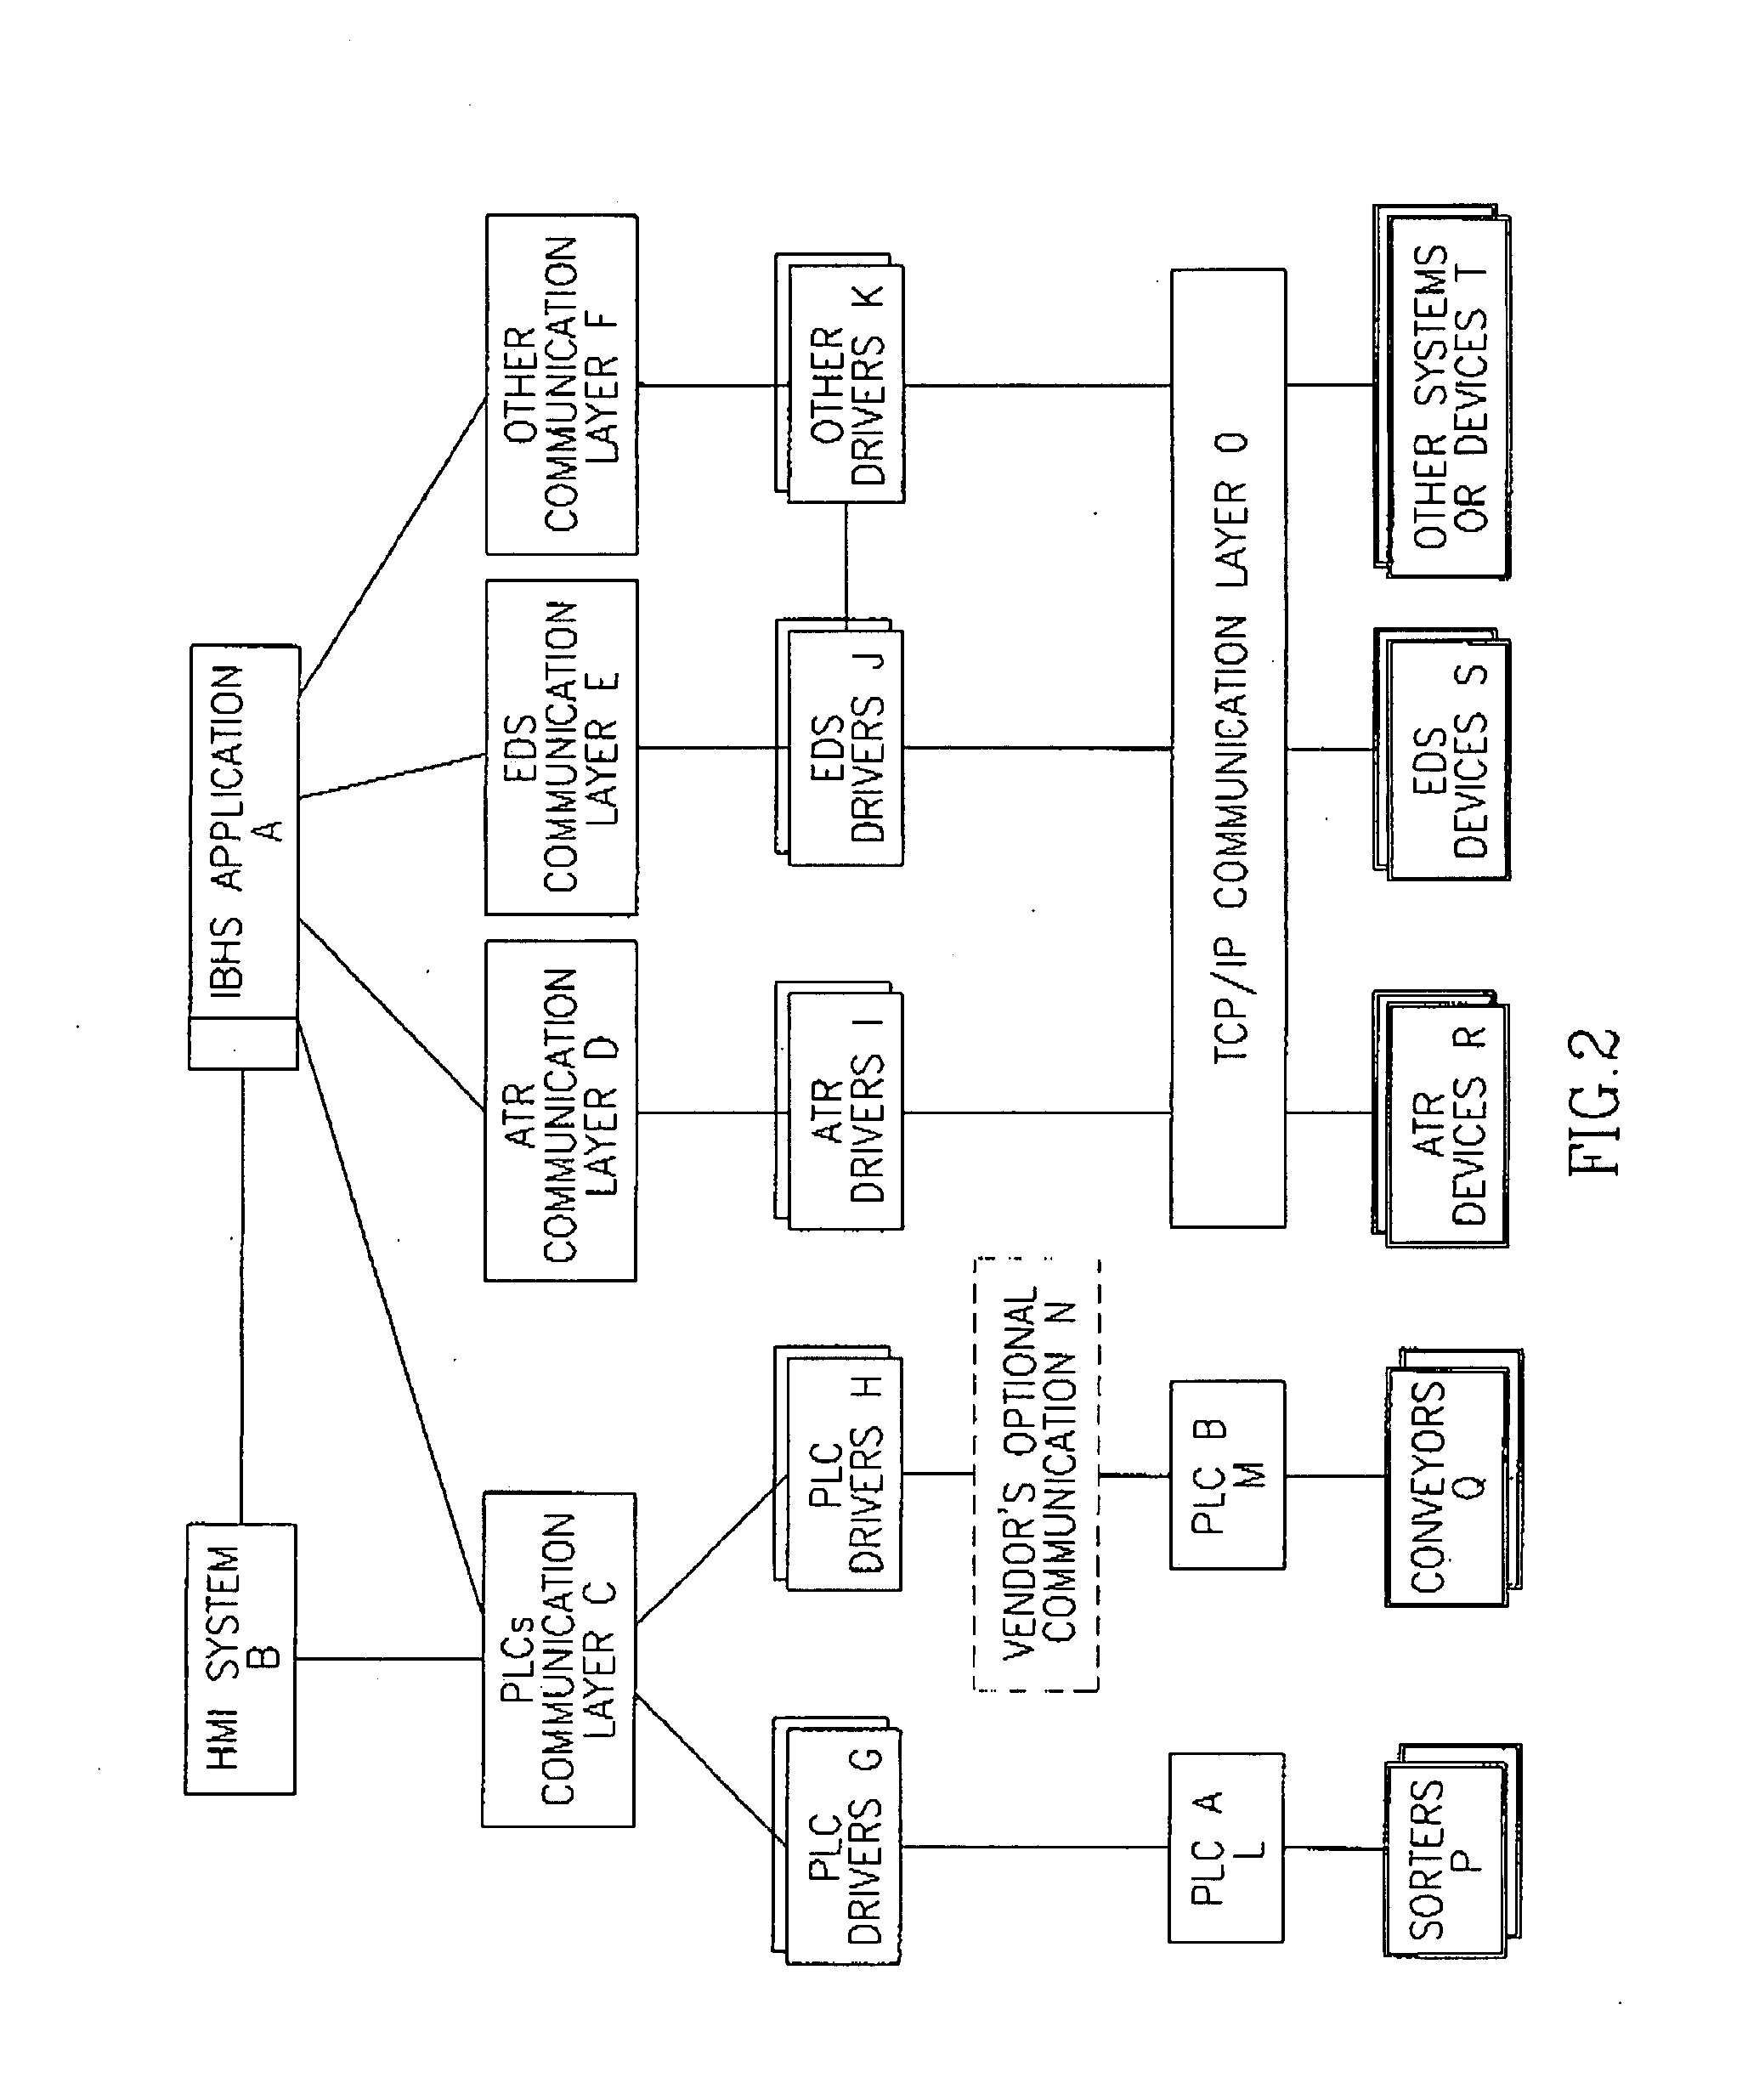 Screening system for objects in transit